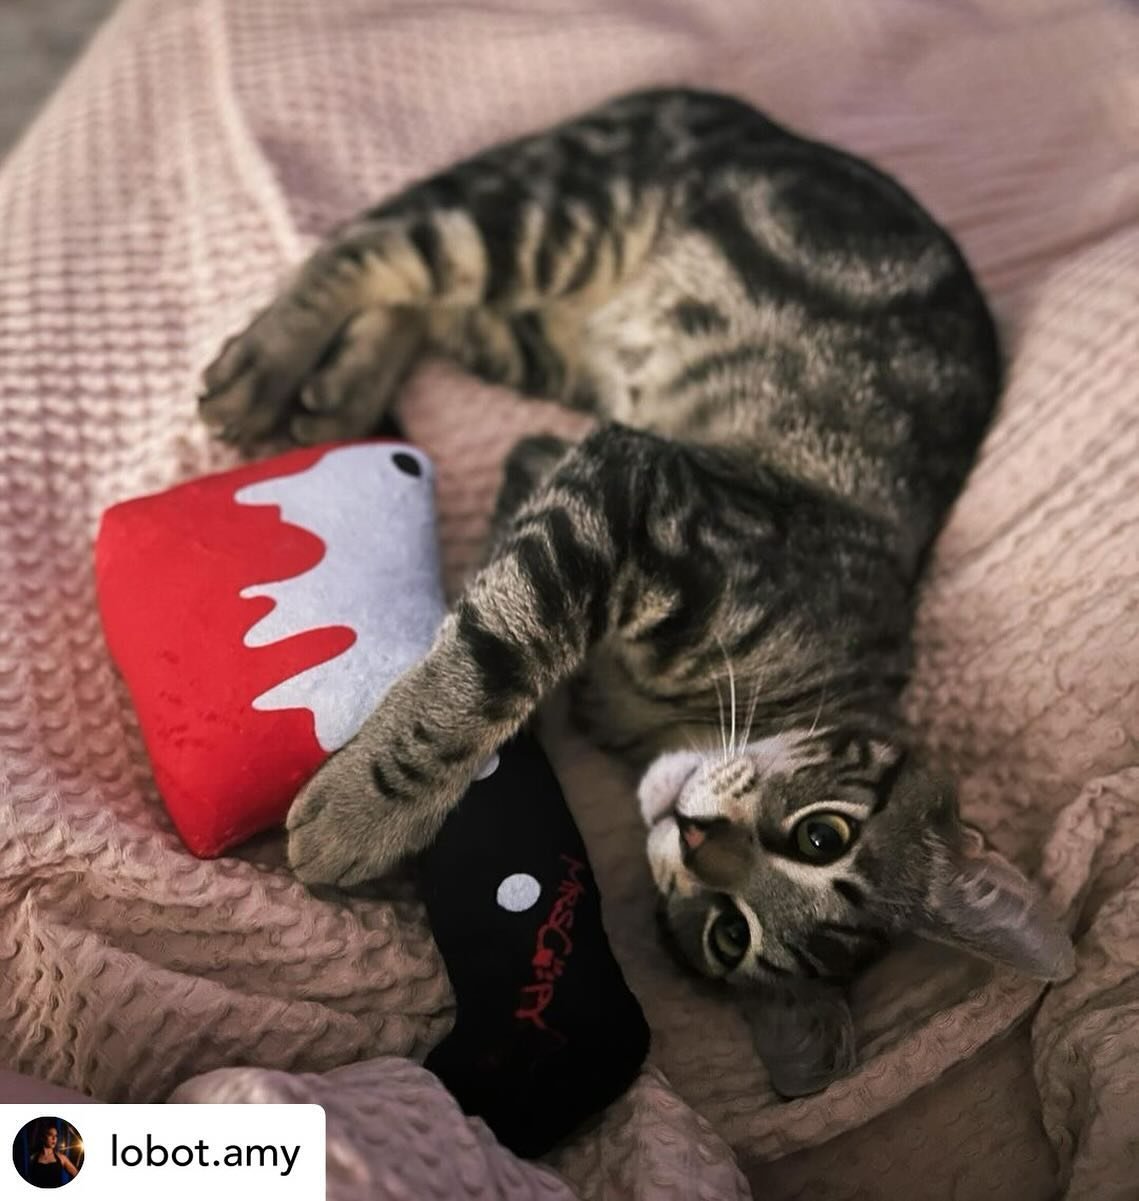 Posted @withregram &bull; @lobot.amy My little axe murderer&hellip;🪓😅 

And shout out to @pinupgirlmo for giving not only the best human gifts but the best cat gifts as well! ❤️

#Obsessedwithmycat #AnotherFuckingHorrorPodcast #AFHP  #TrueCrime #Tr